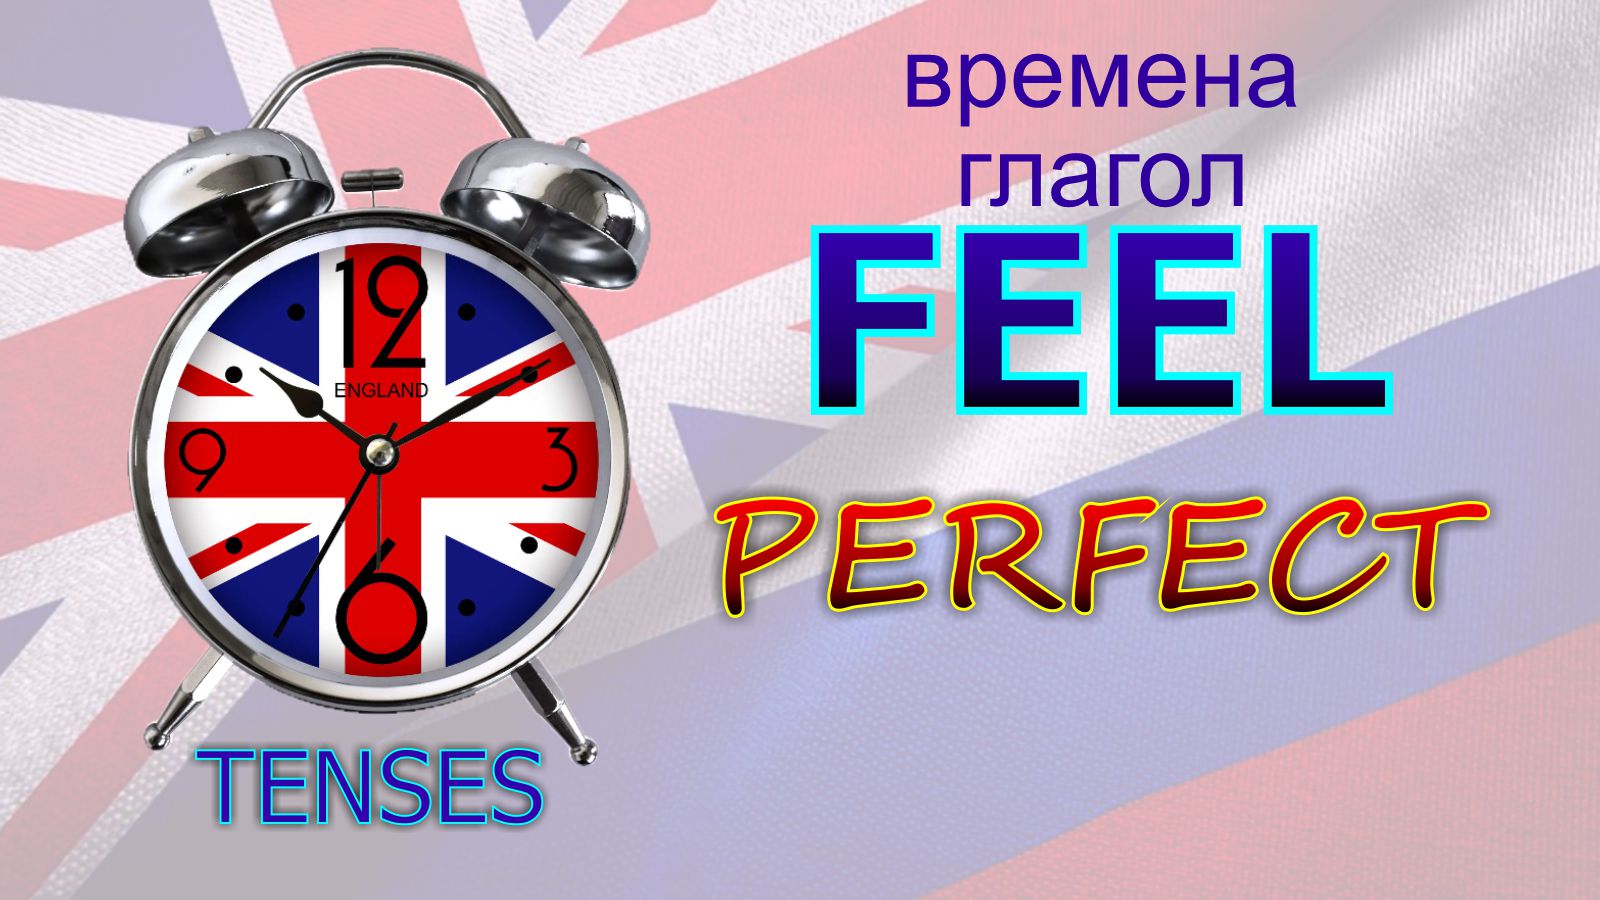 Времена. Глагол to FEEL PERFECT